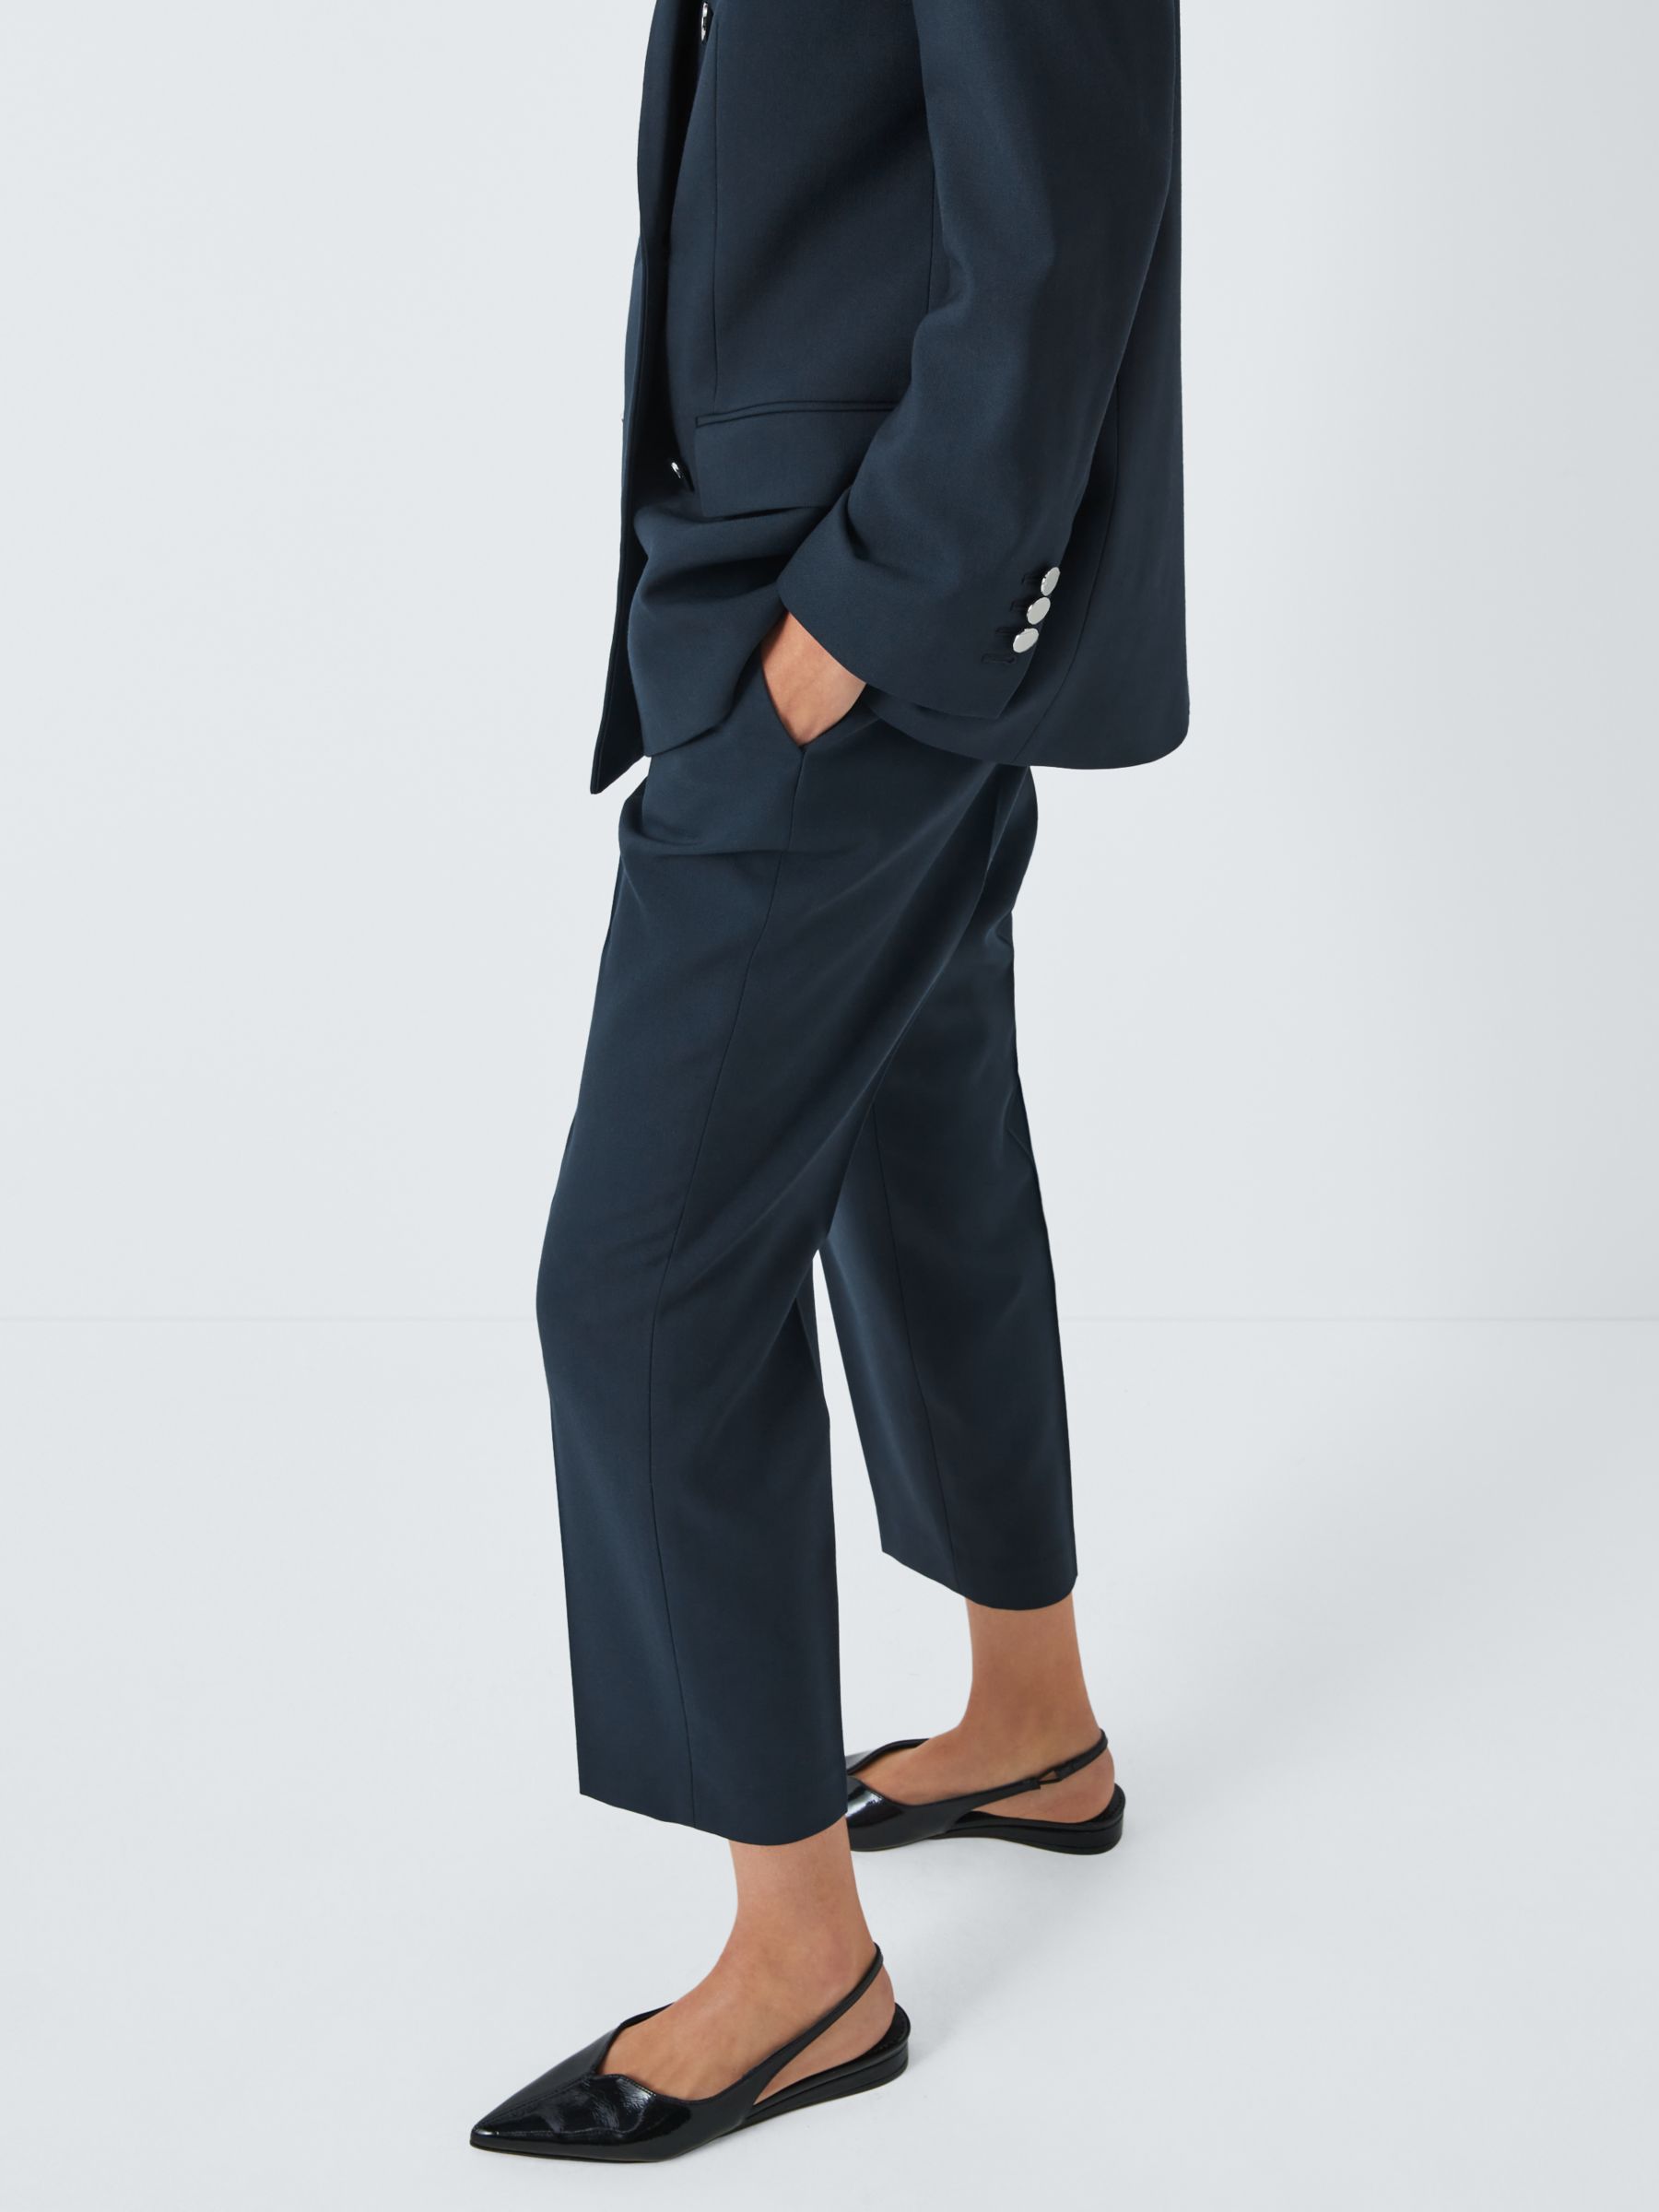 Buy Theory Slim Leg Cropped Trousers Online at johnlewis.com